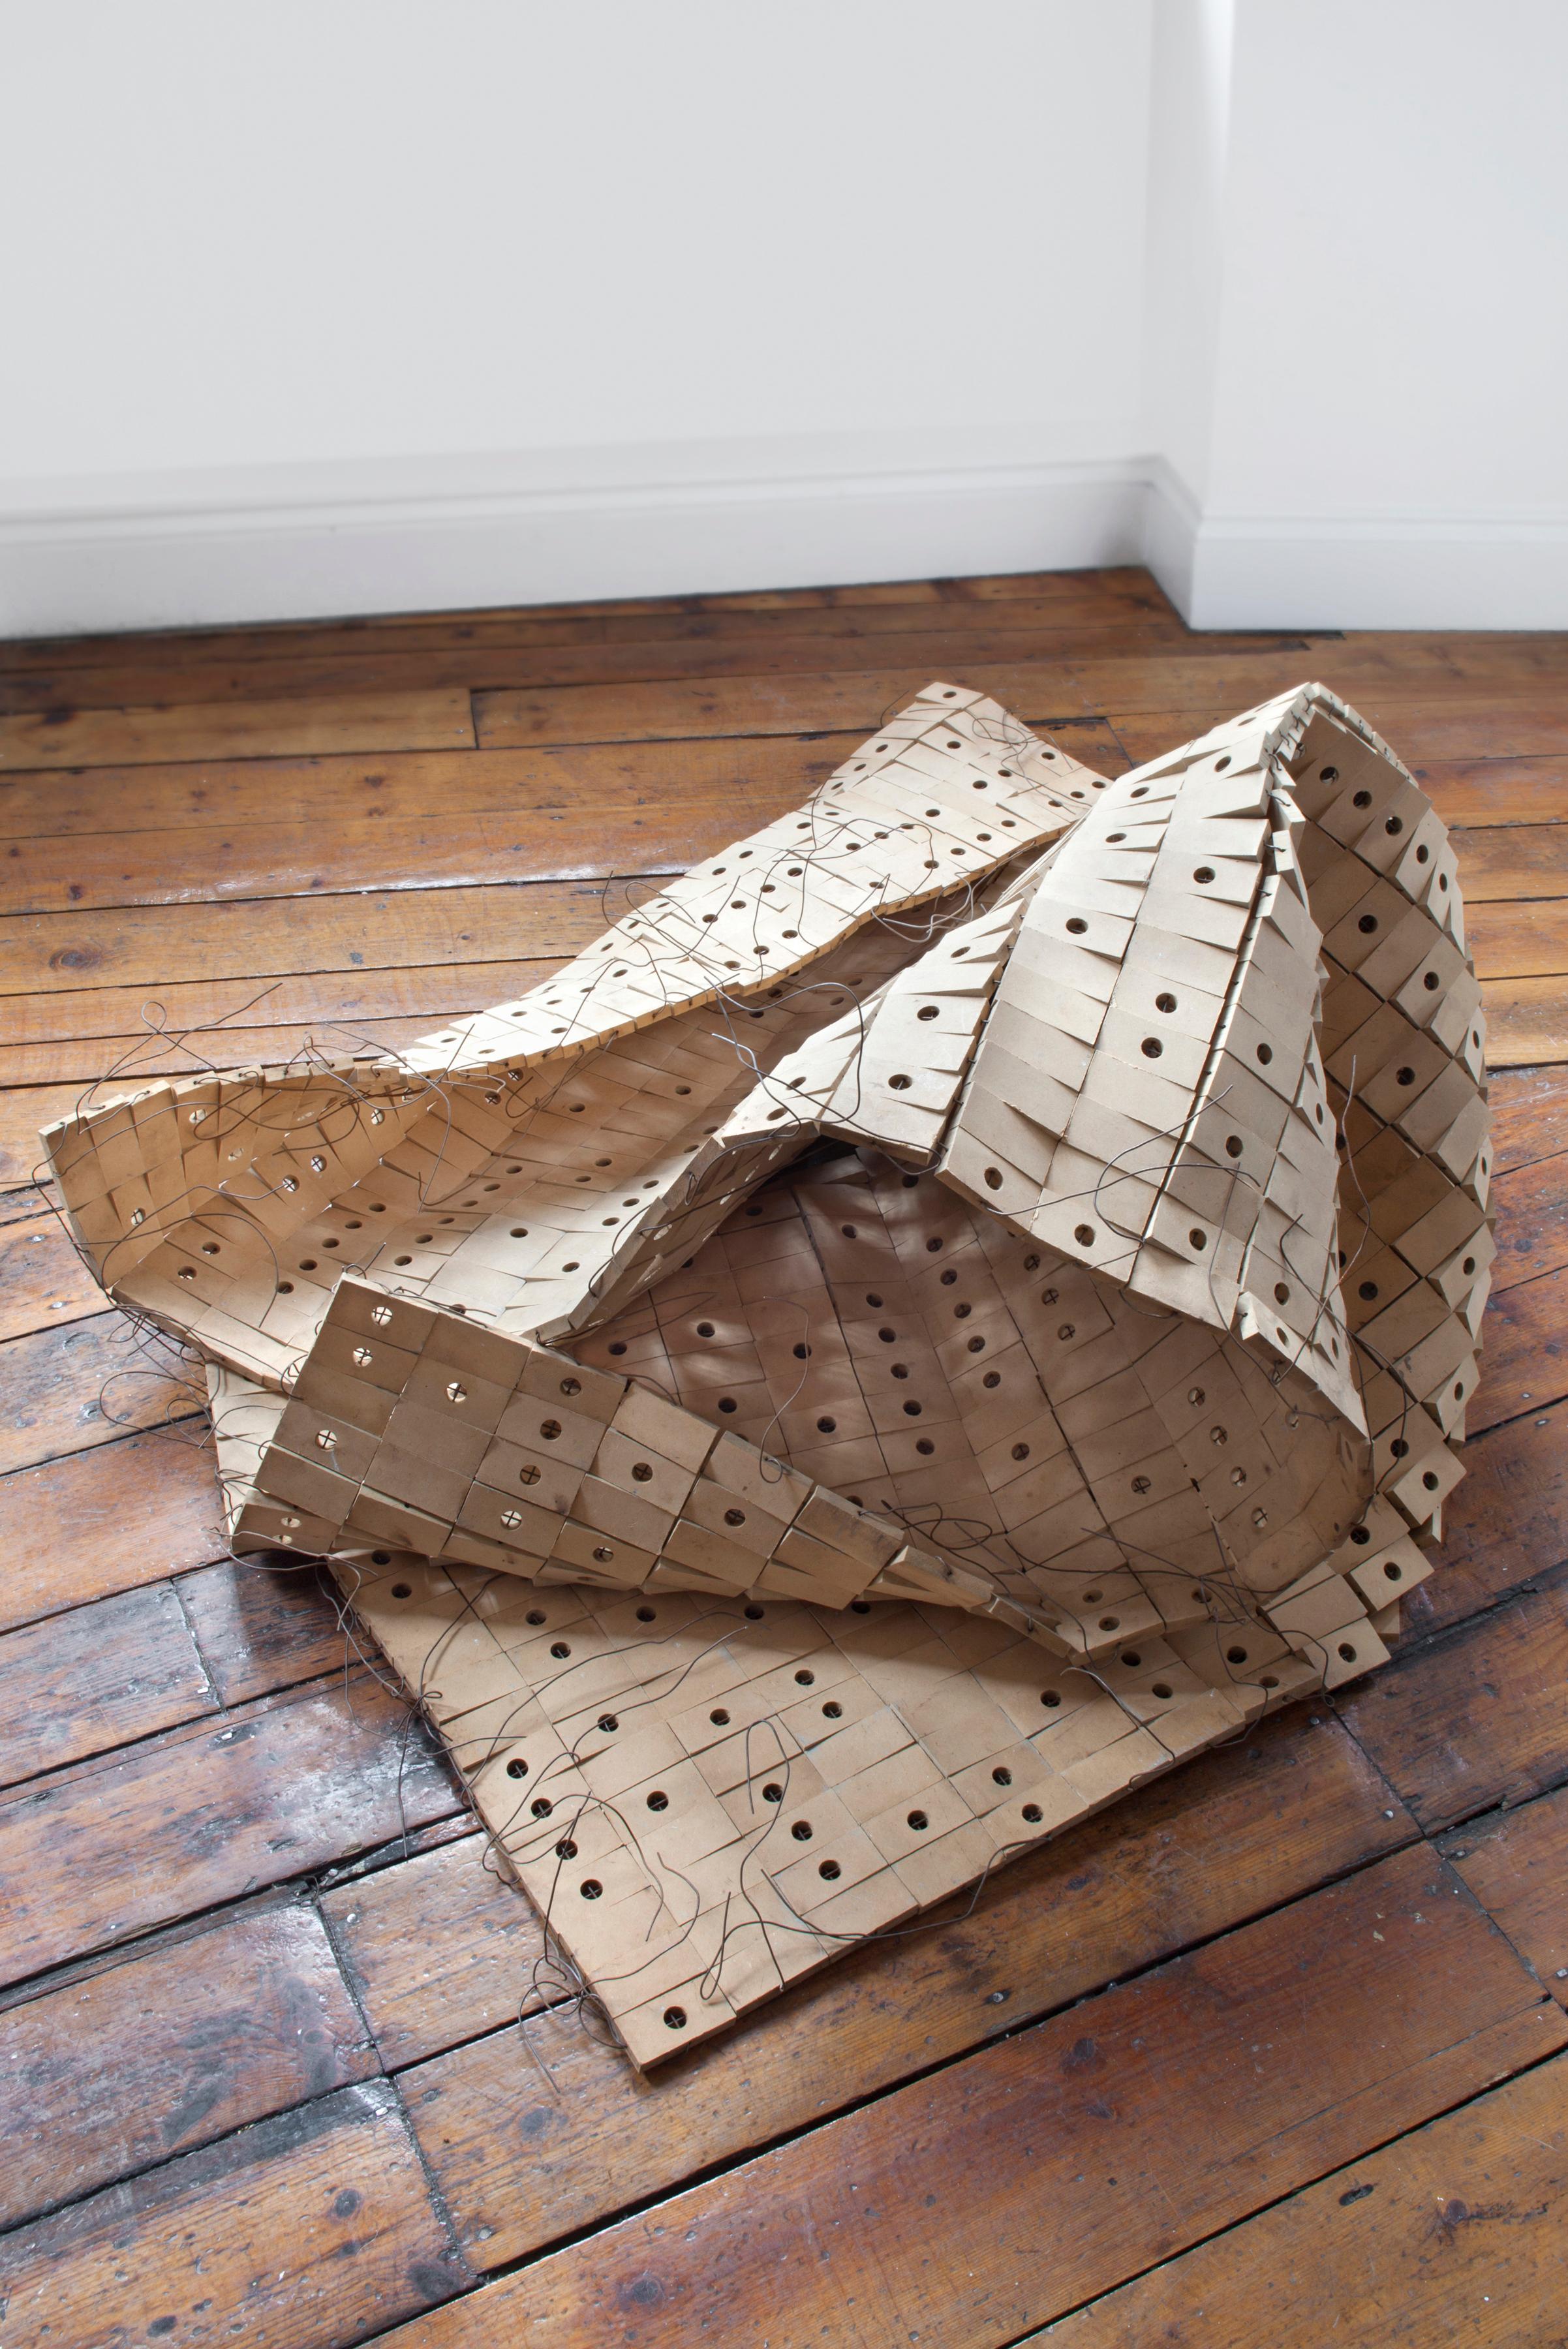 Eight by Four (Variation), 1994, MDF, iron wire, 96 1/10 × 48 × 2/5 in; 244 × 122 × 1 cm (variable)

Alan Franklin’s drawings and sculptures are a playful exploration of materials and processes, as well as of our perception.  Proceeding from a